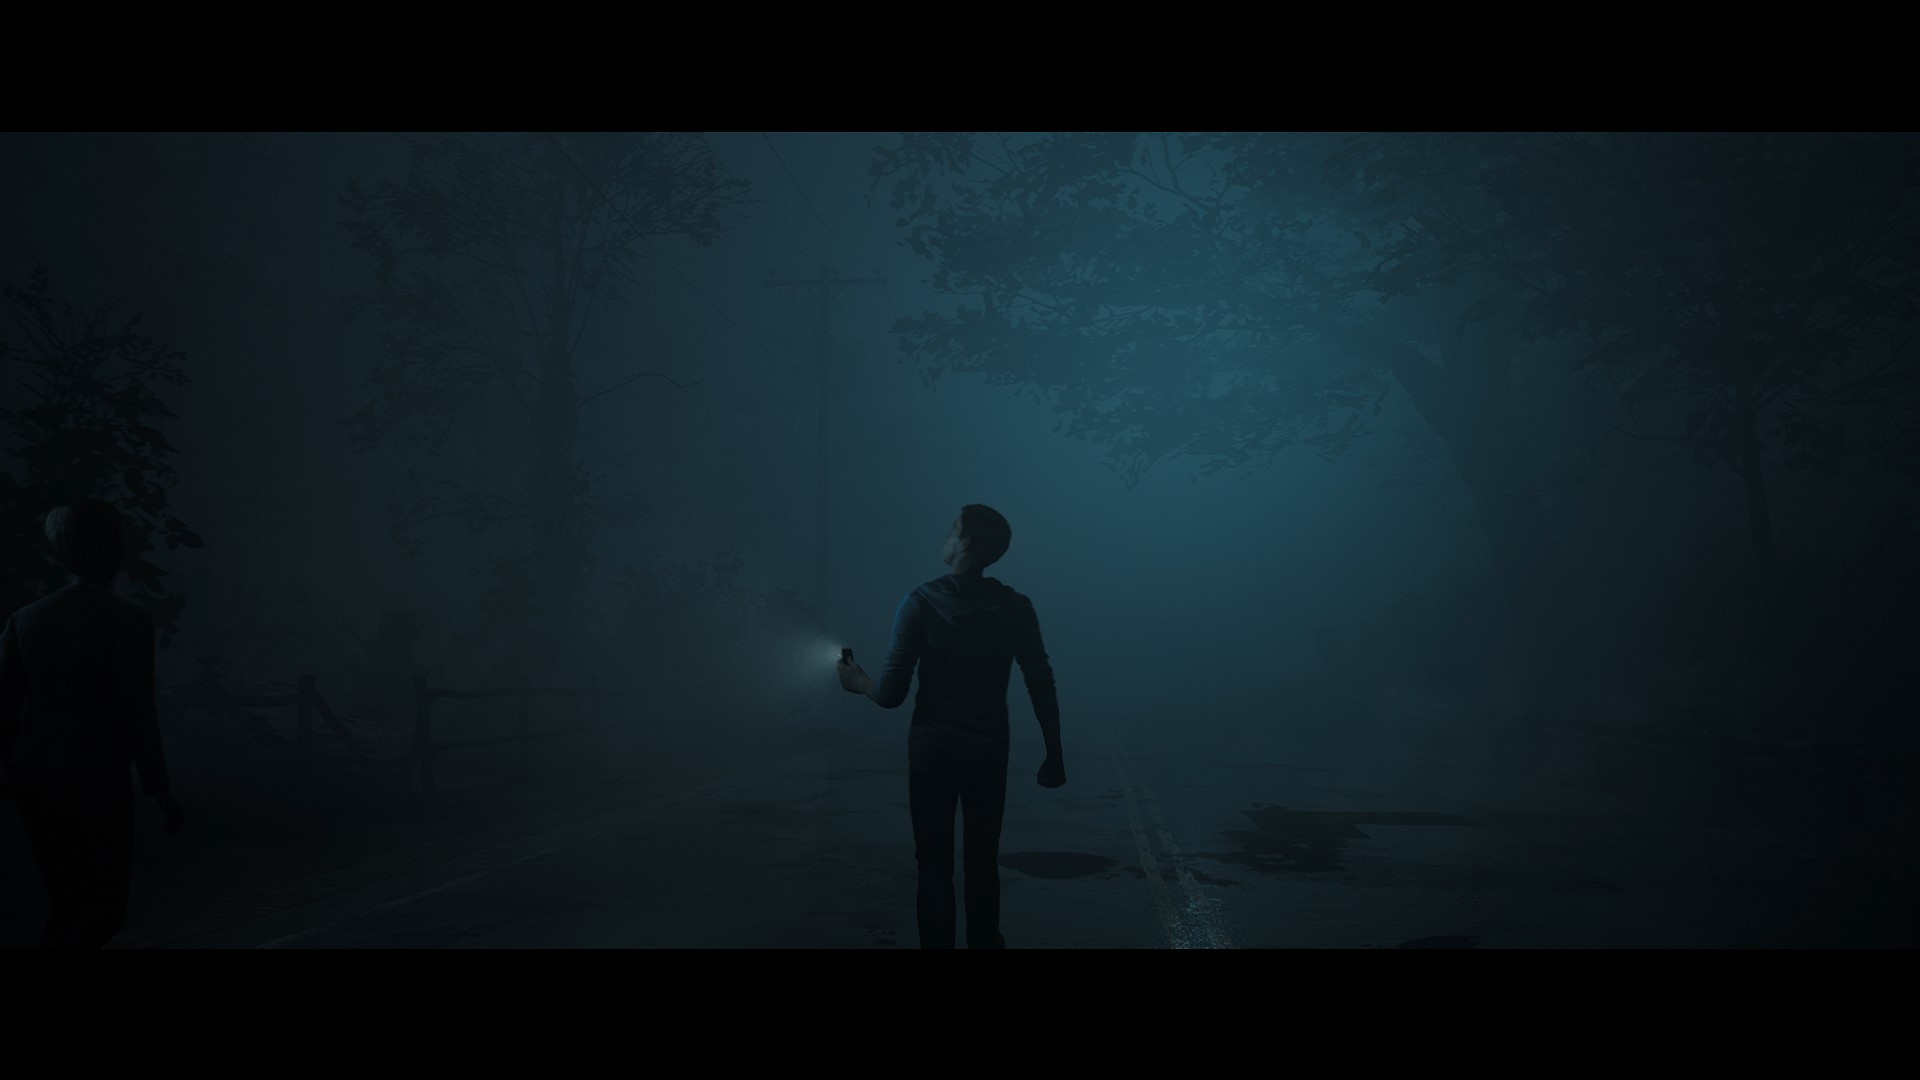 Andrew wandering through a foggy road with a flashlight